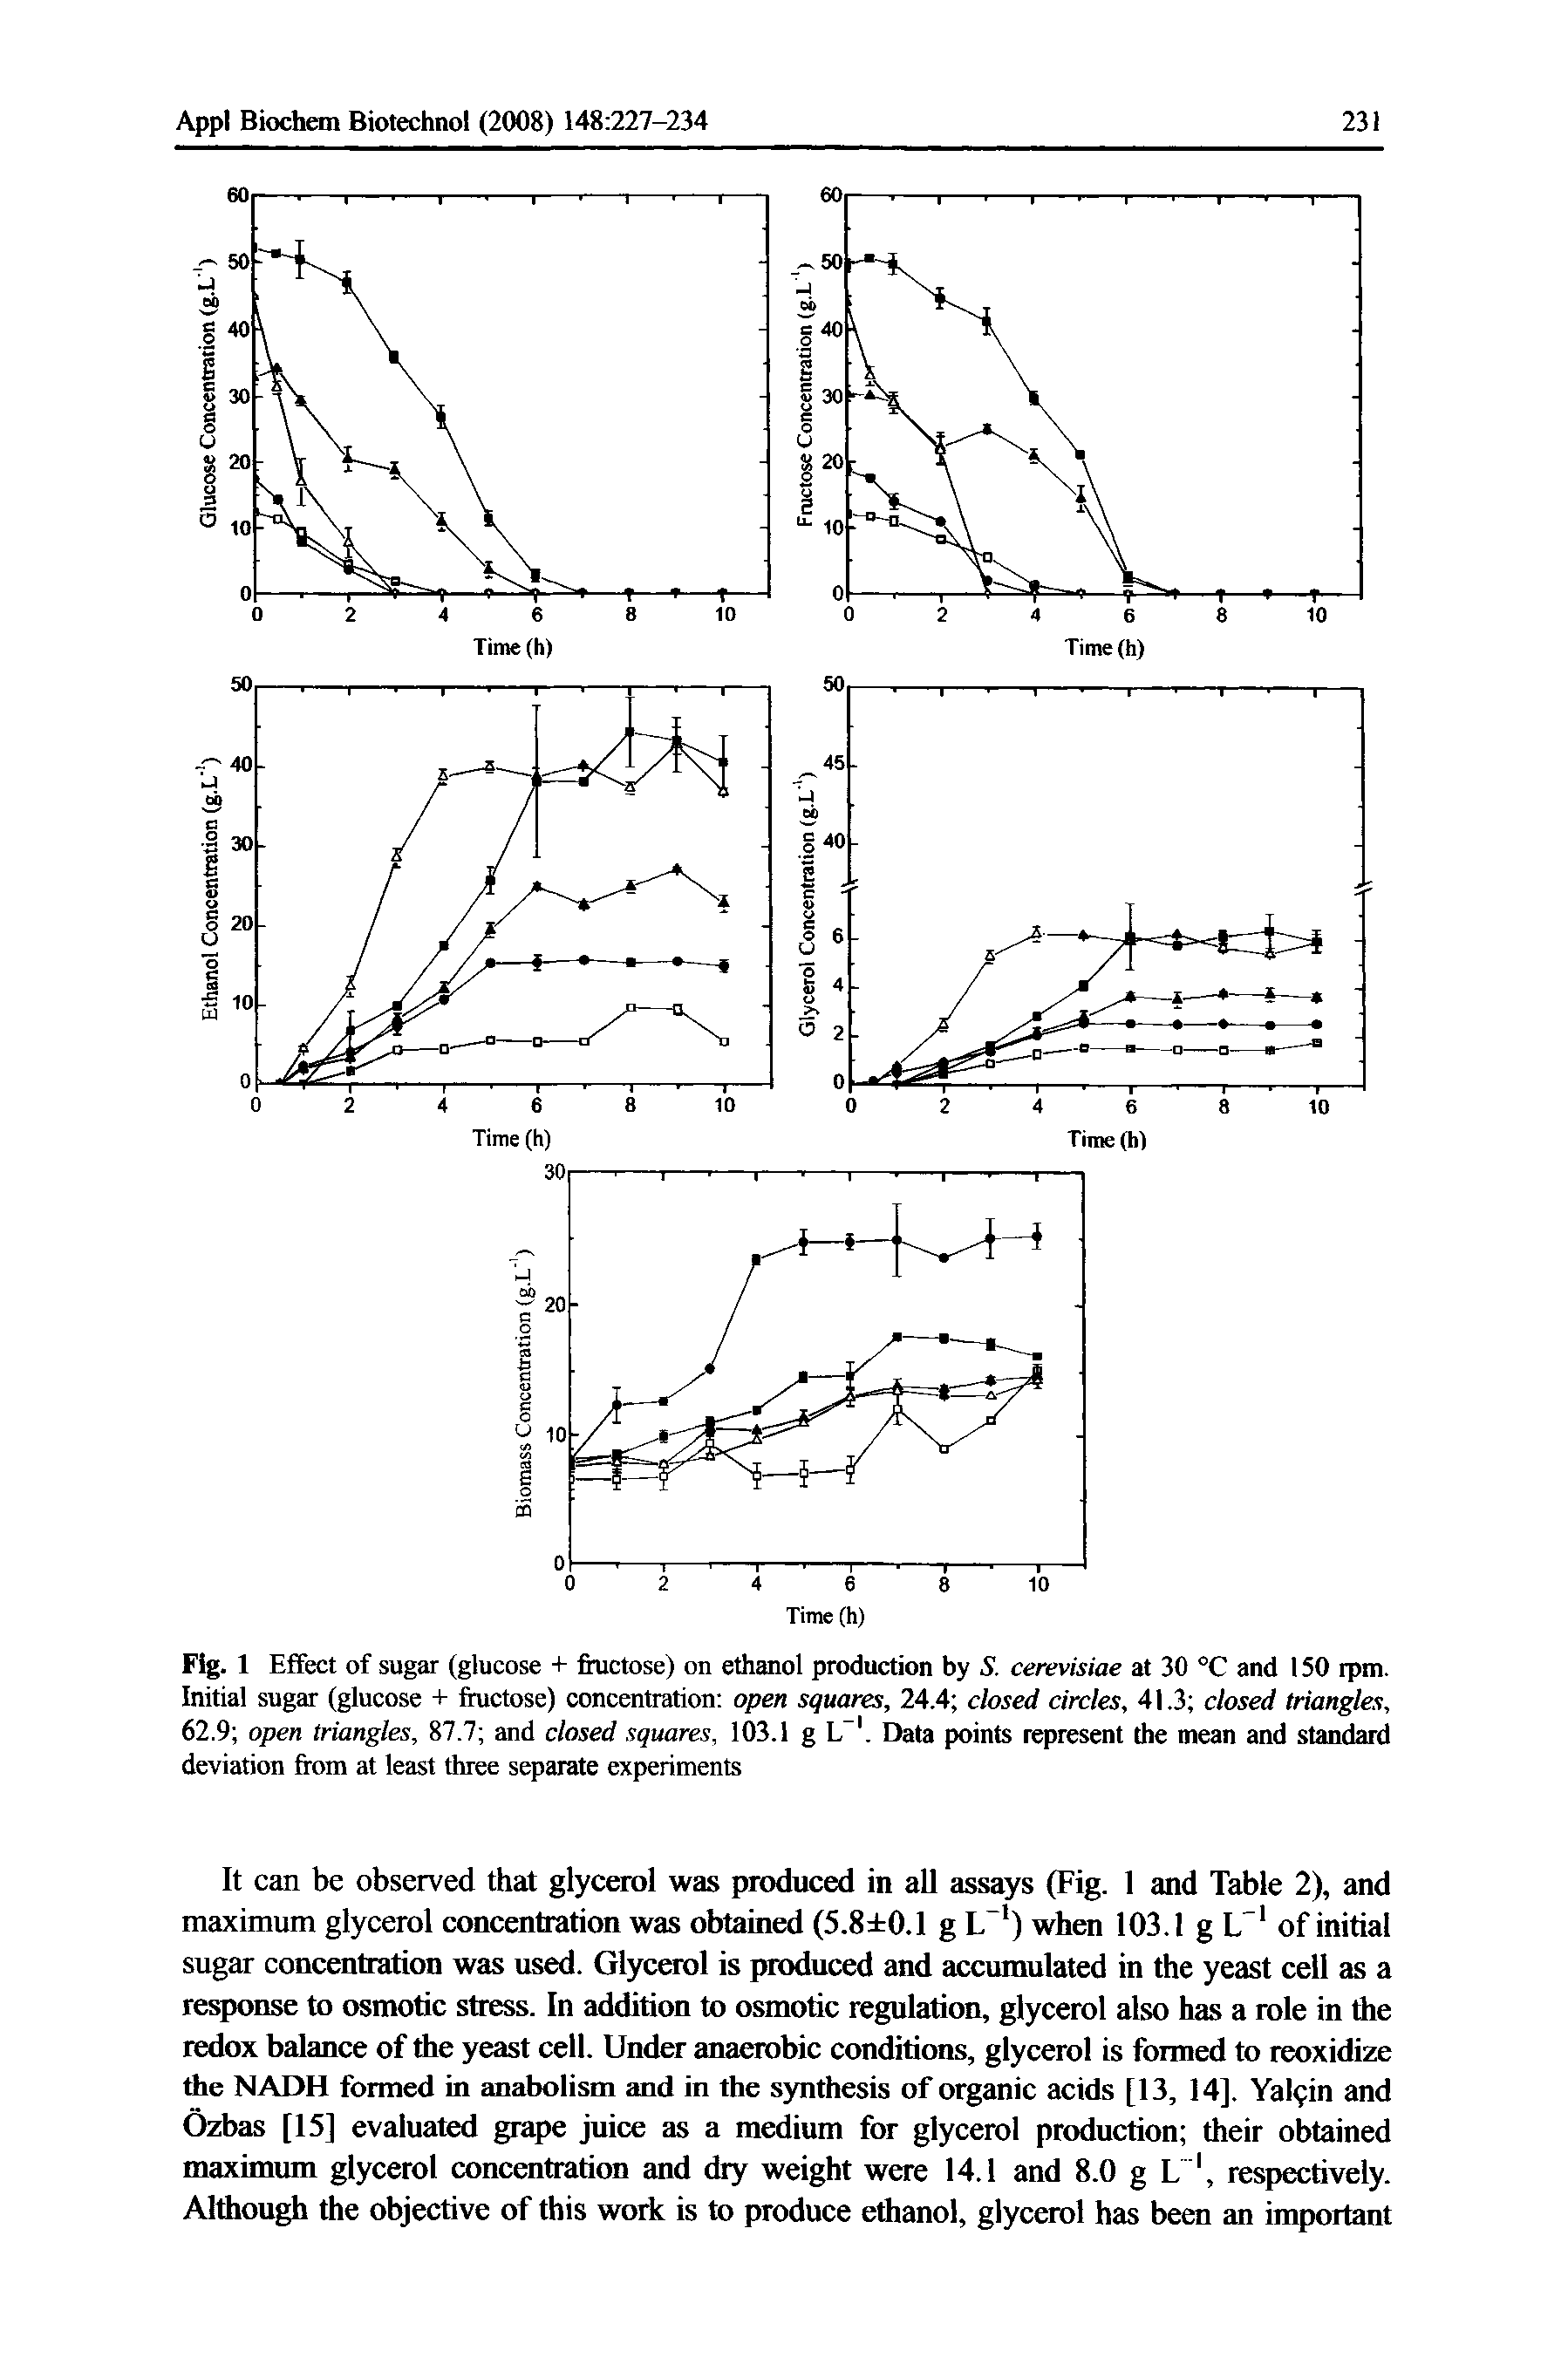 Fig. 1 Effect of sugar (glucose + fructose) on ethanol production by S. cerevisiae at 30 °C and 150 rpin. Initial sugar (glucose + fructose) concentration open squares, 24.4 closed circles, 41.3 closed triangles, 62.9 open triangles, 87.7 and closed squares, 103.1 g L . Data points represent the mean and standard deviation from at least three separate experiments...